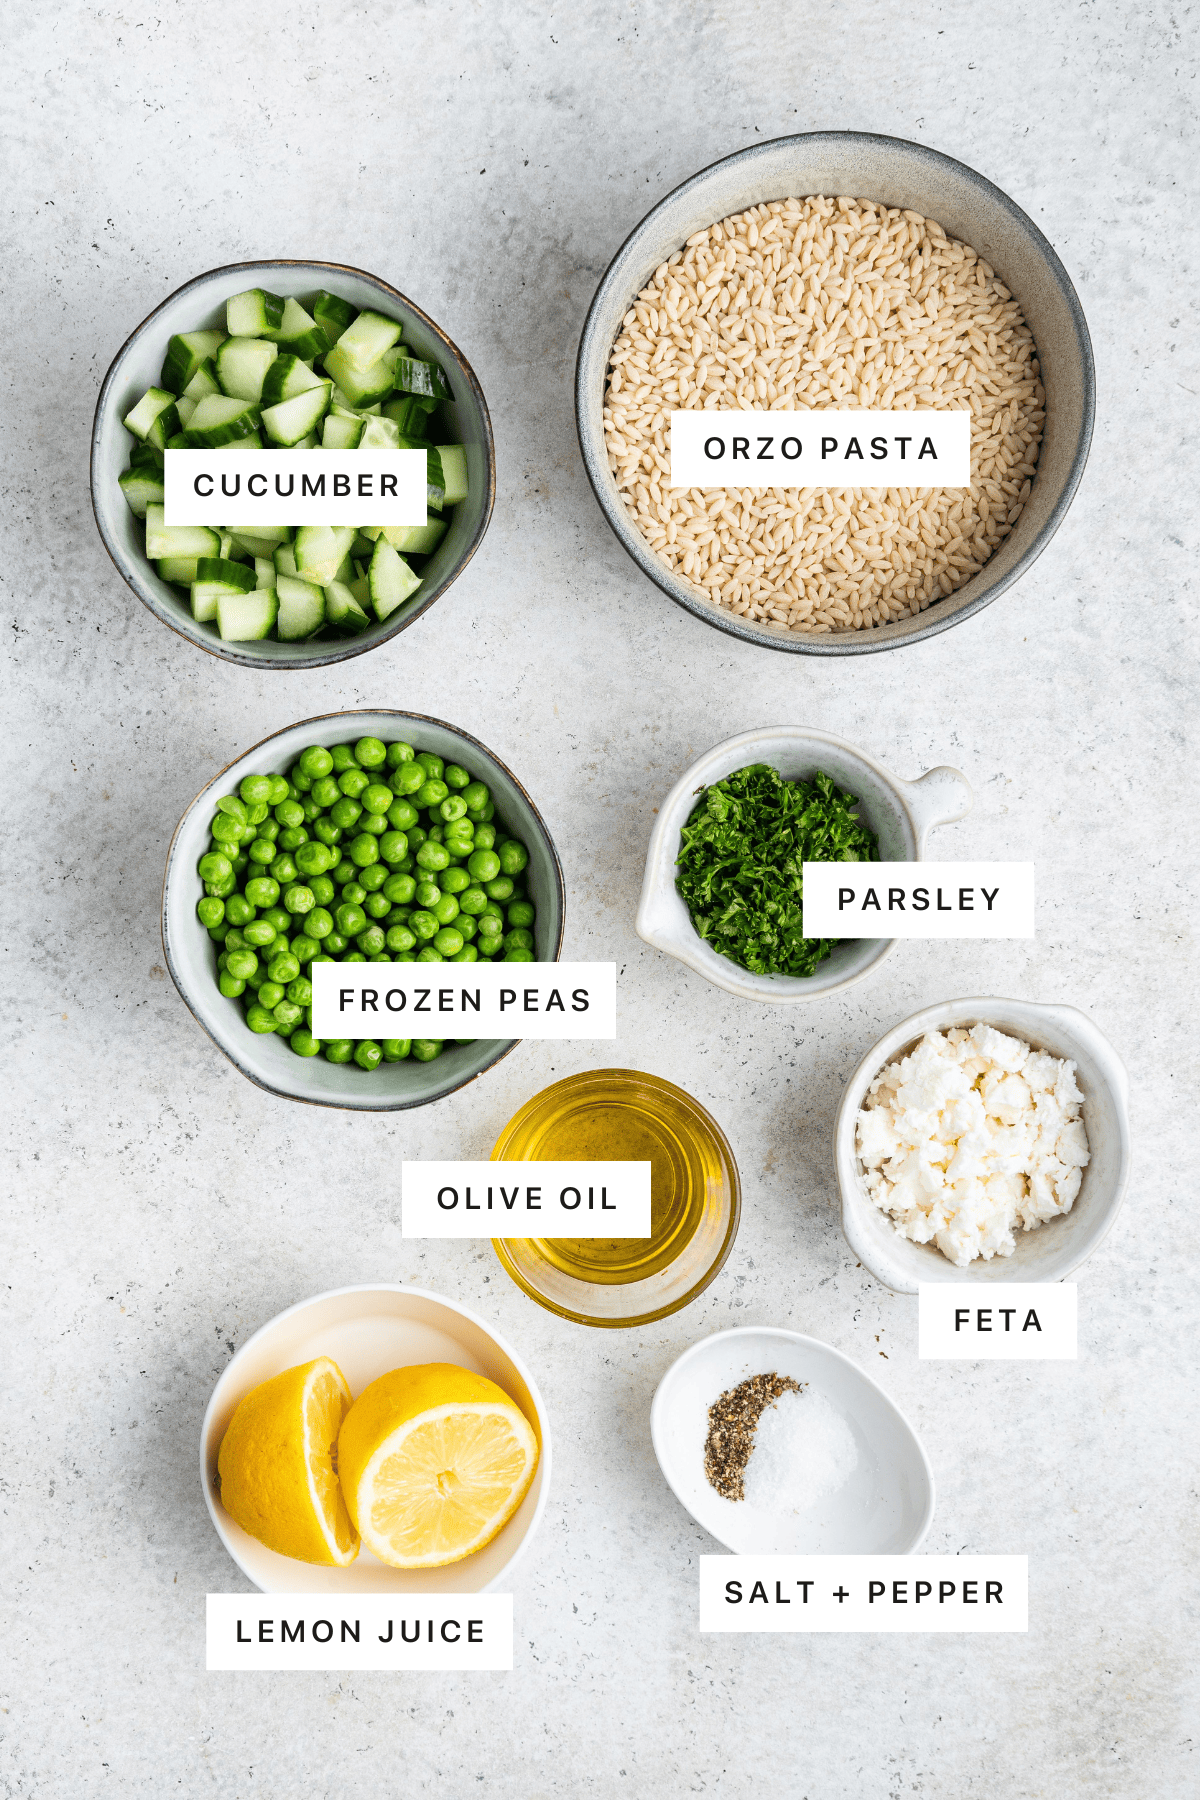 Ingredients for the lemon orzo salad: orzo pasta, cucumbers, frozen peas, parsley, feta cheese, olive oil, lemon juice, salt and pepper.